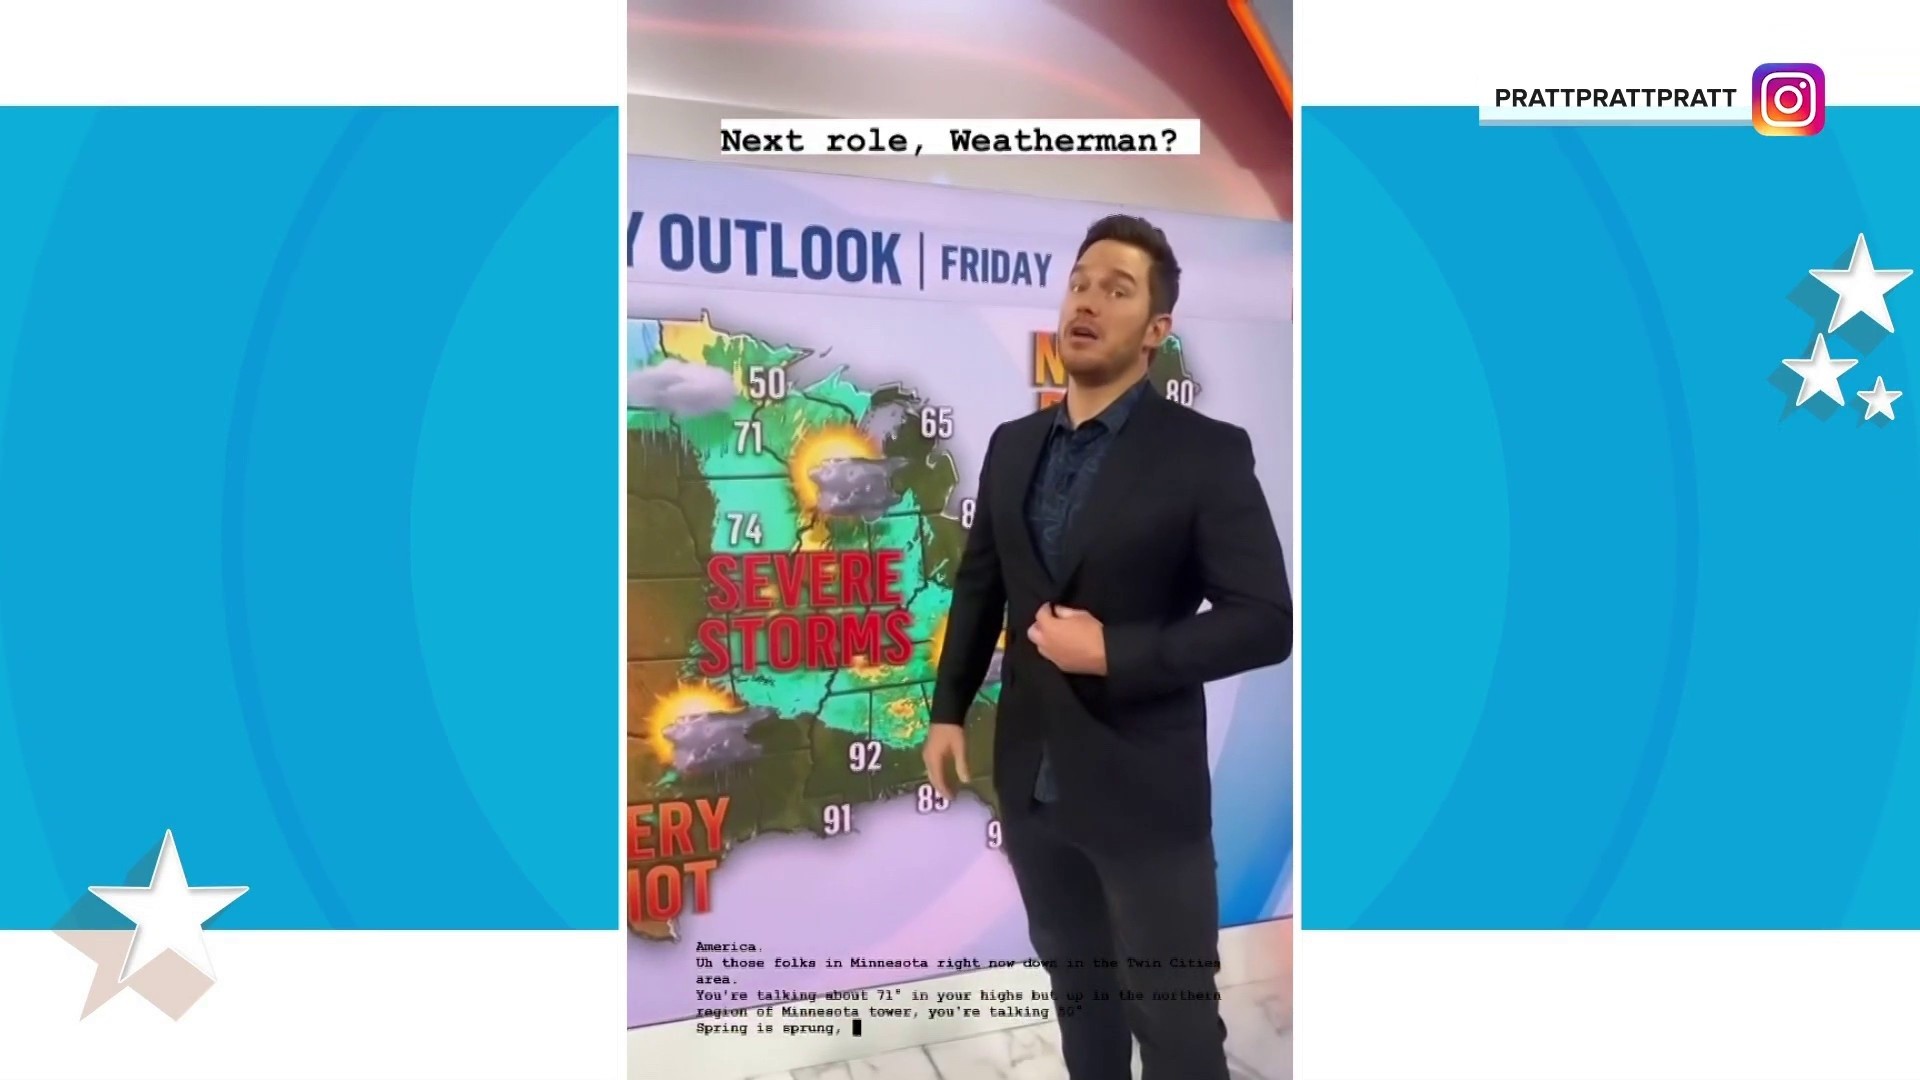 Watch Chris Pratt try his hand at TODAY's weather wall